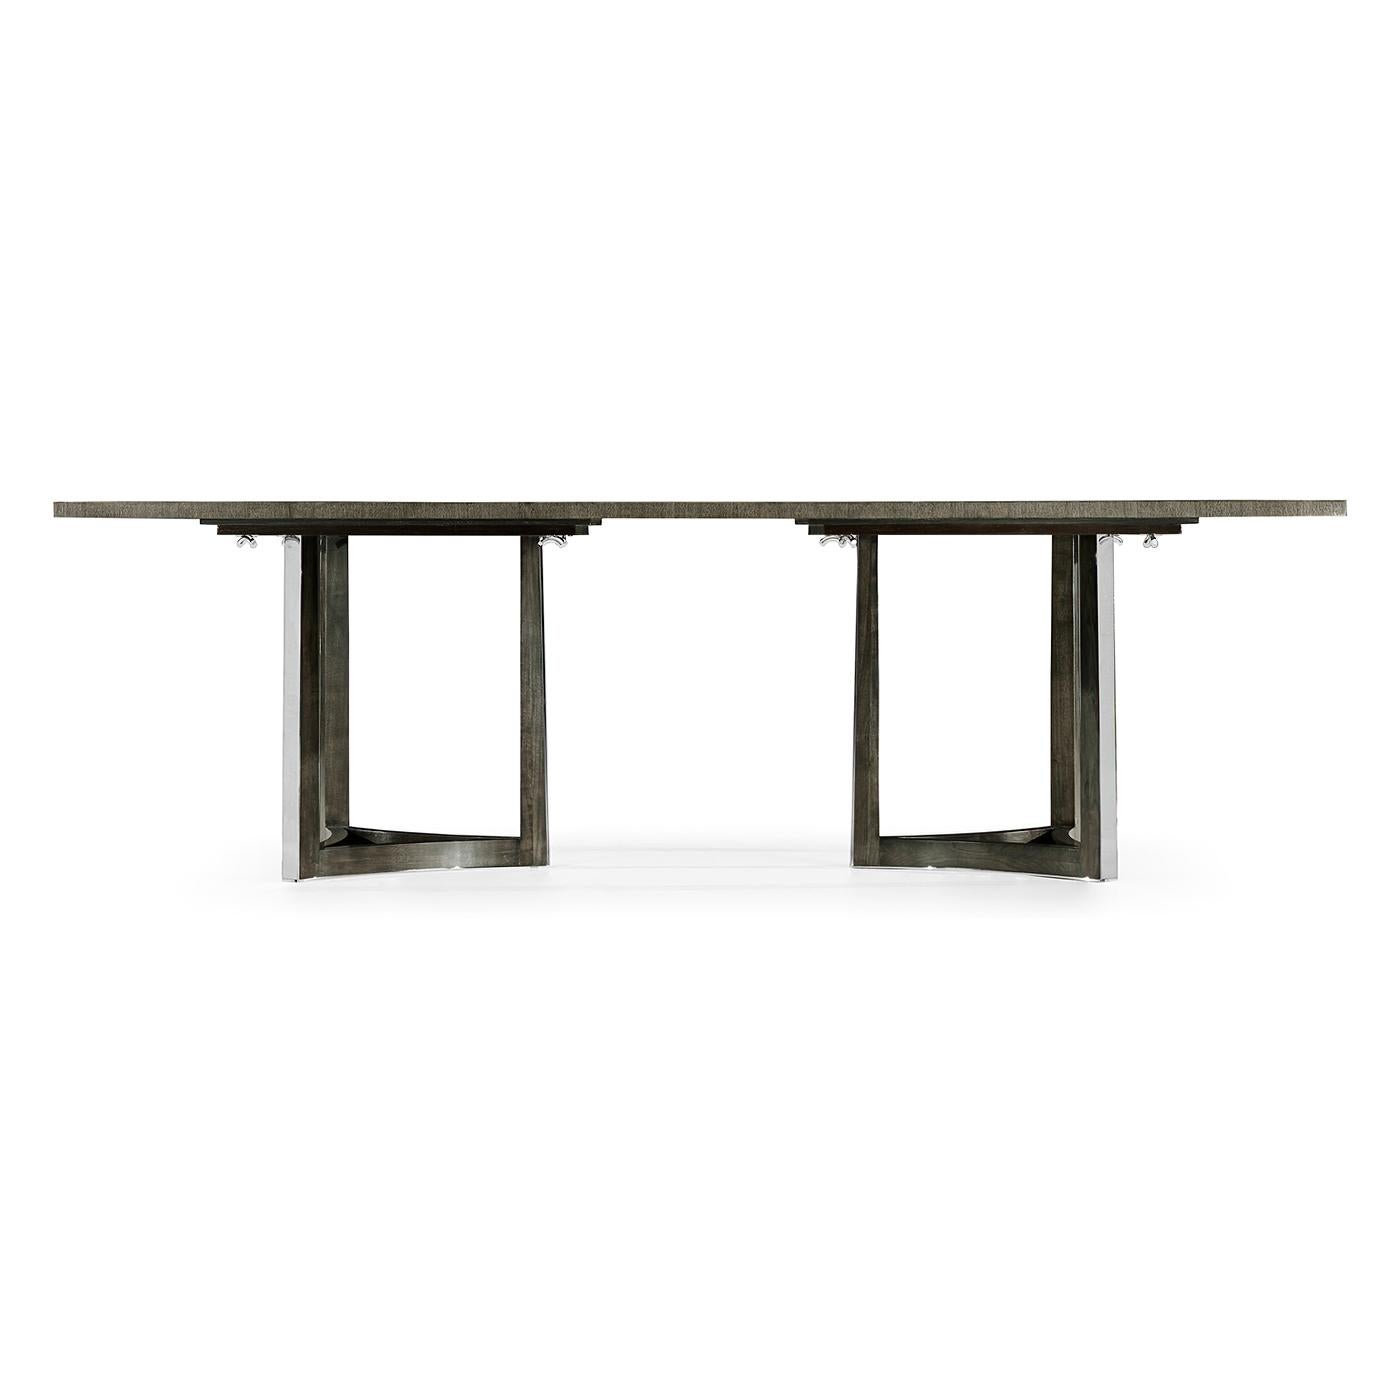 An Art Deco inspired dining table with an unusual Eucalyptus veneered patterned stop with cross banding and raised in two tripartite stainless steel pedestals.

Dimensions: 108